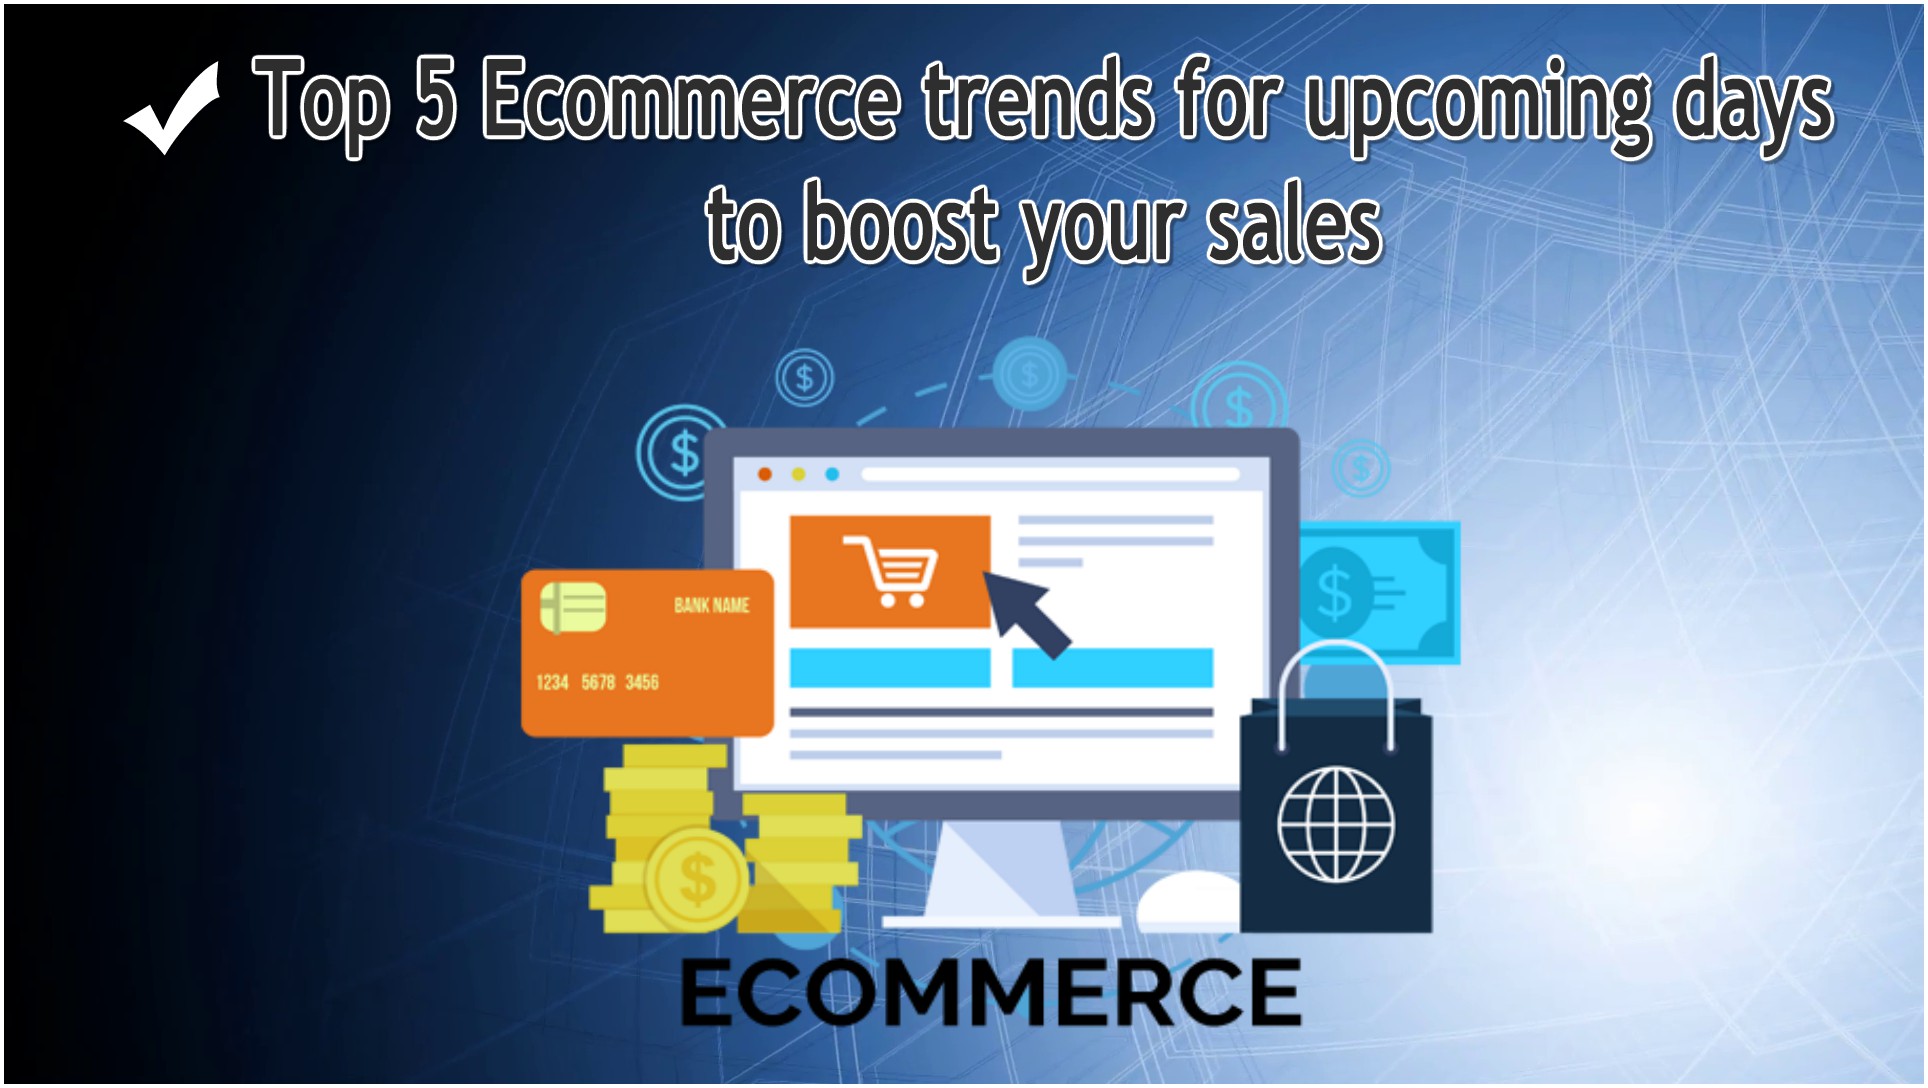 Top 5 Ecommerce trends for upcoming days to boost your sales